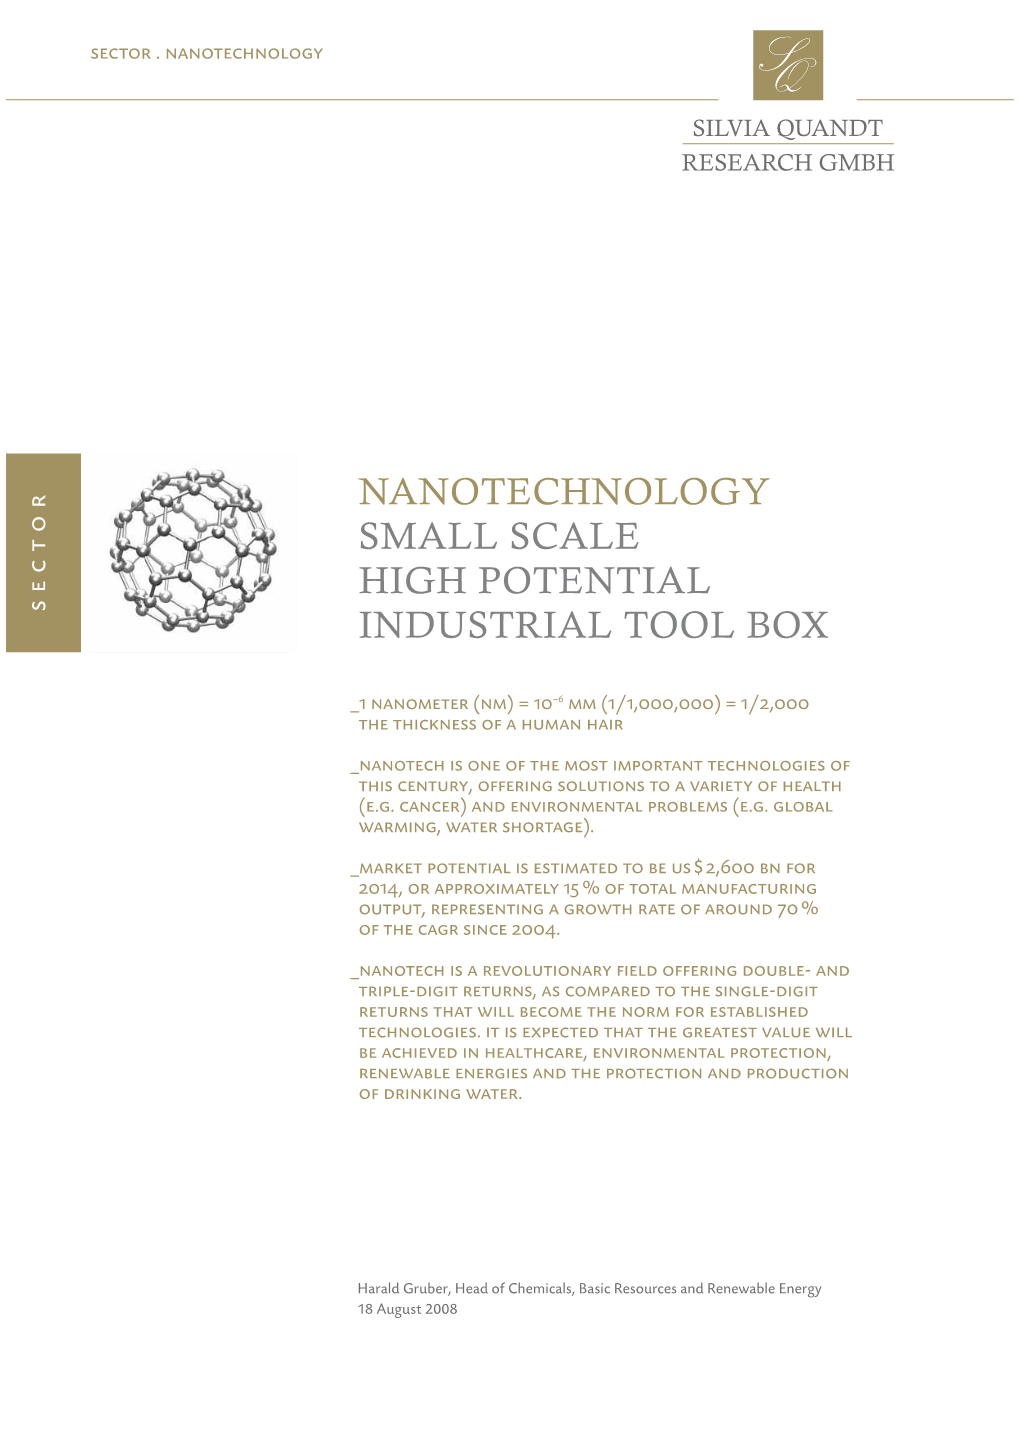 Nanotechnology Small Scale High Potential Industrial